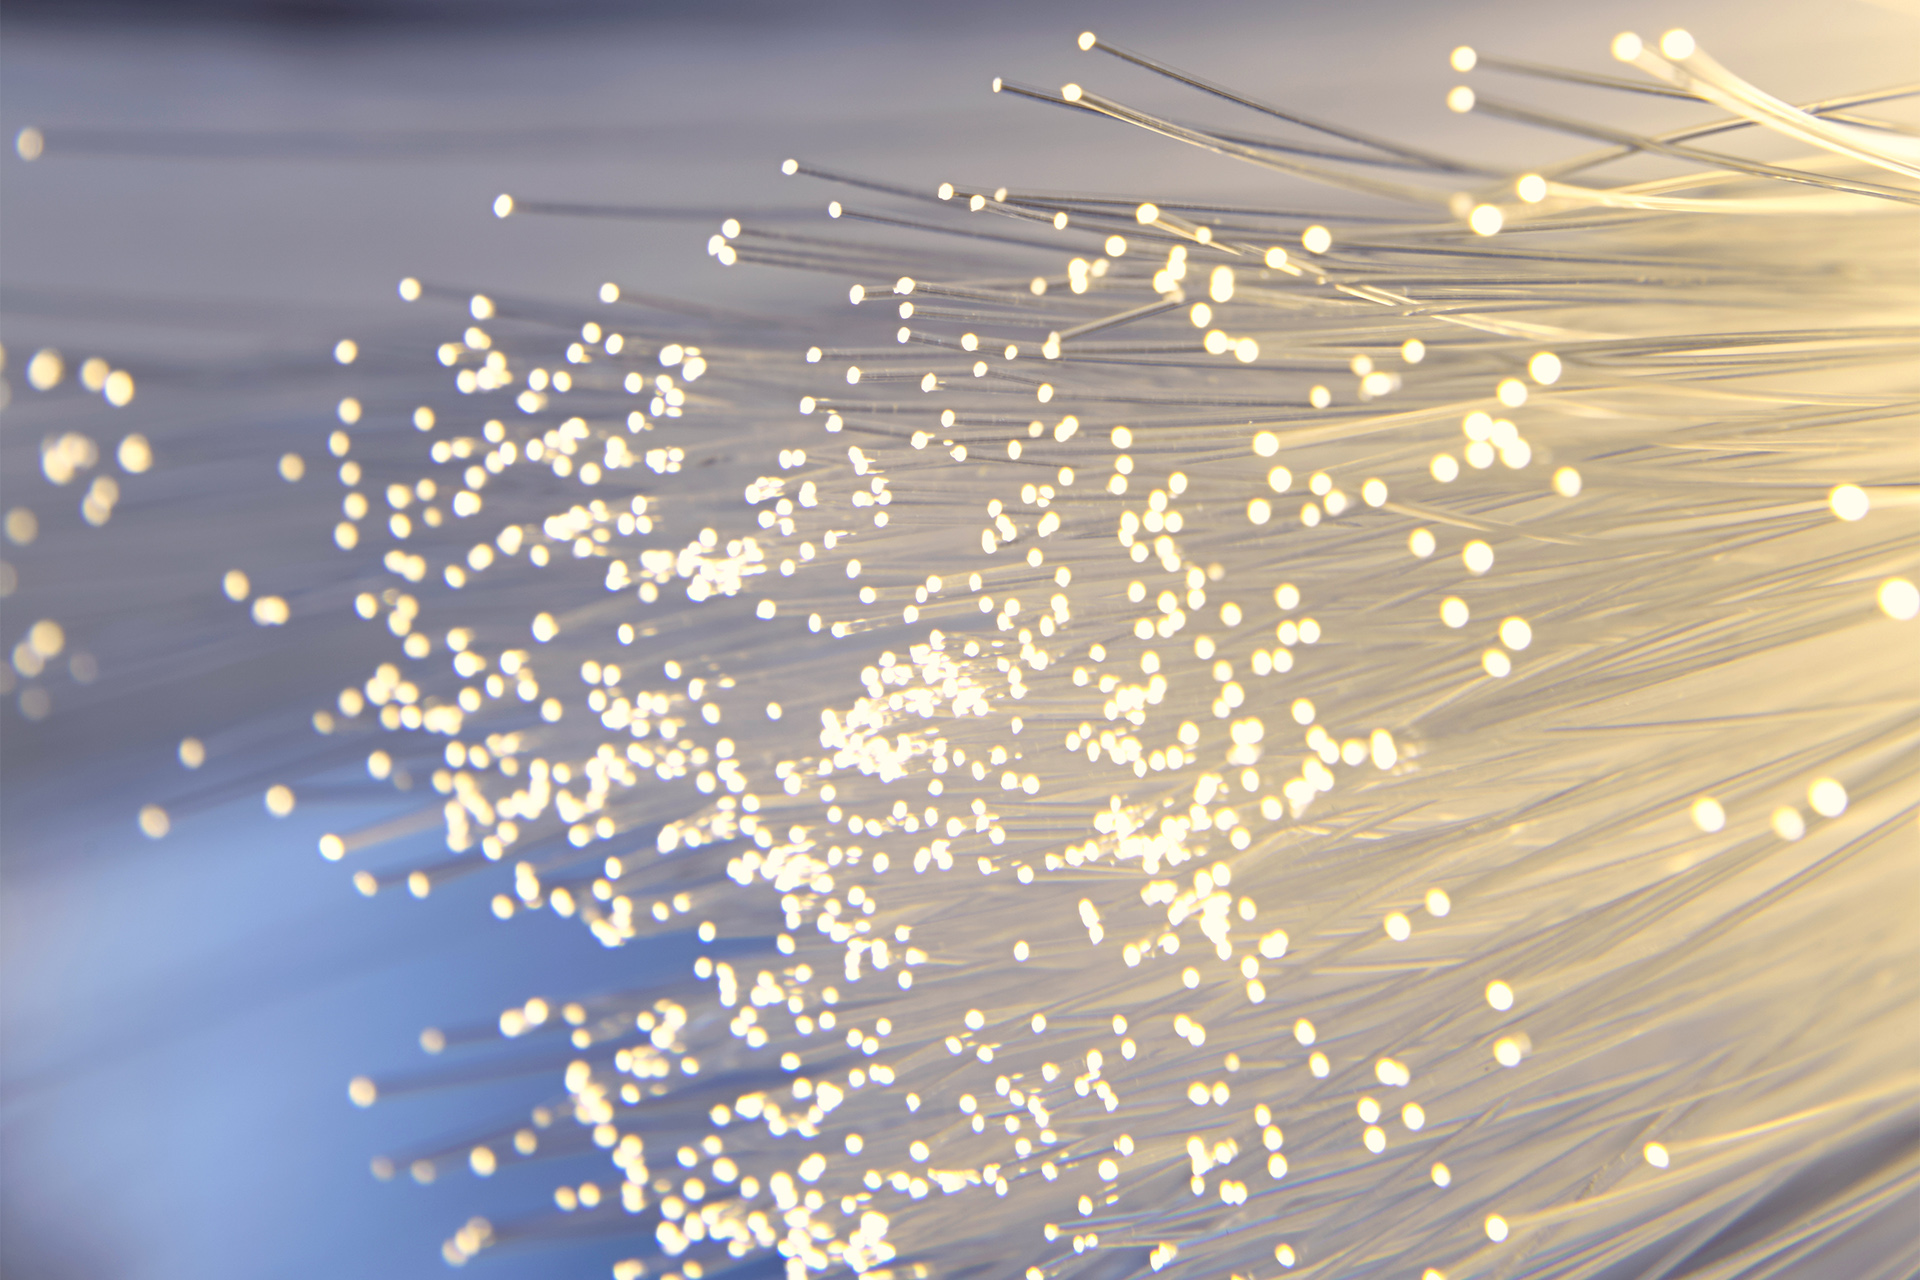 Rostec Creates Optical Fiber for Data Transmission Over Cable Networks in Corrosive Environments 